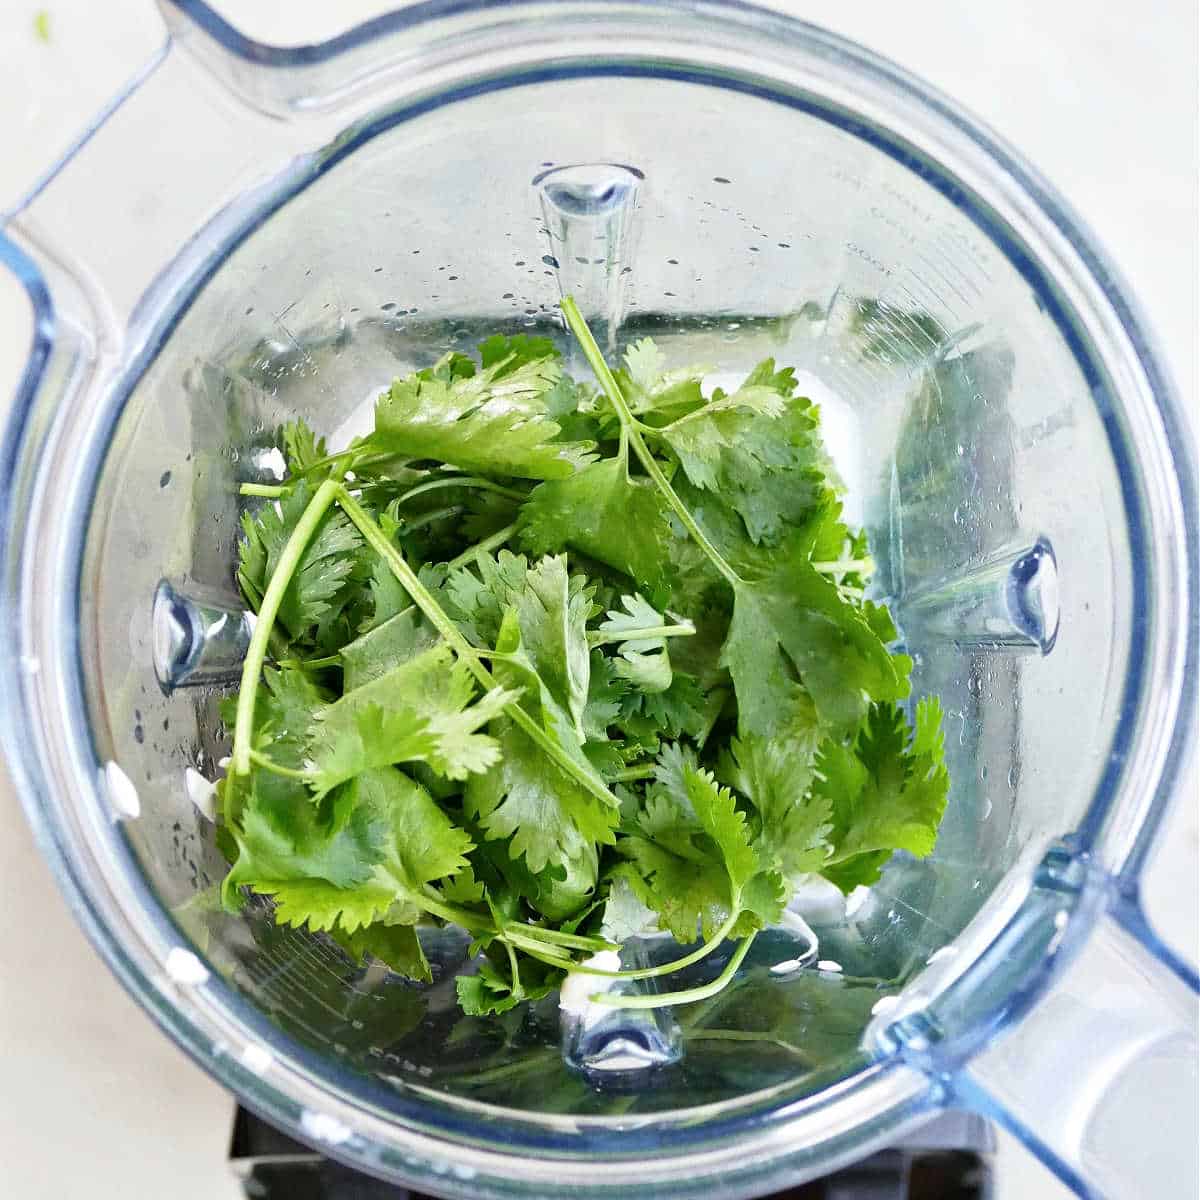 cilantro and other ingredients in a blender before being made into sauce